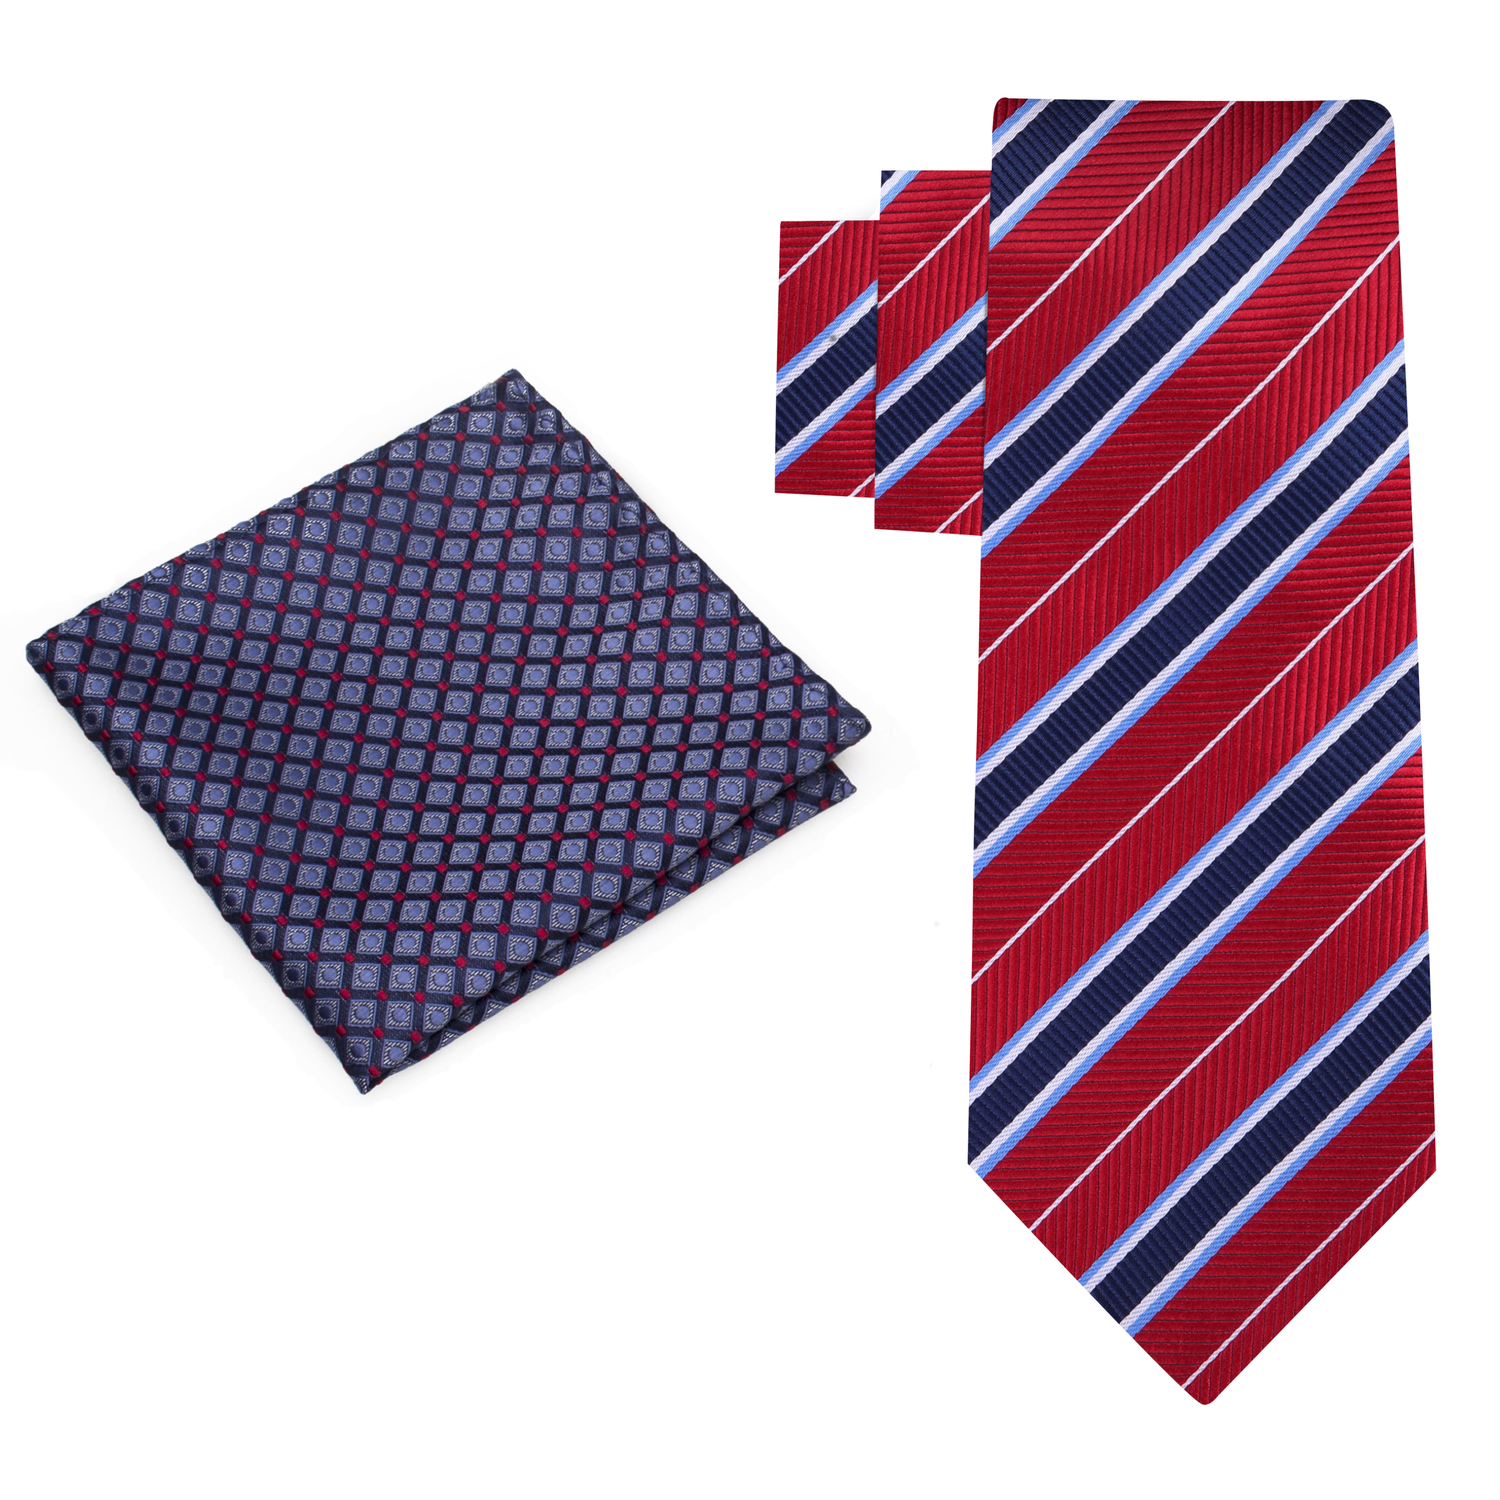 Alt View: Red, Blue Stripe Necktie with Blue, Red Geometric Pocket Square